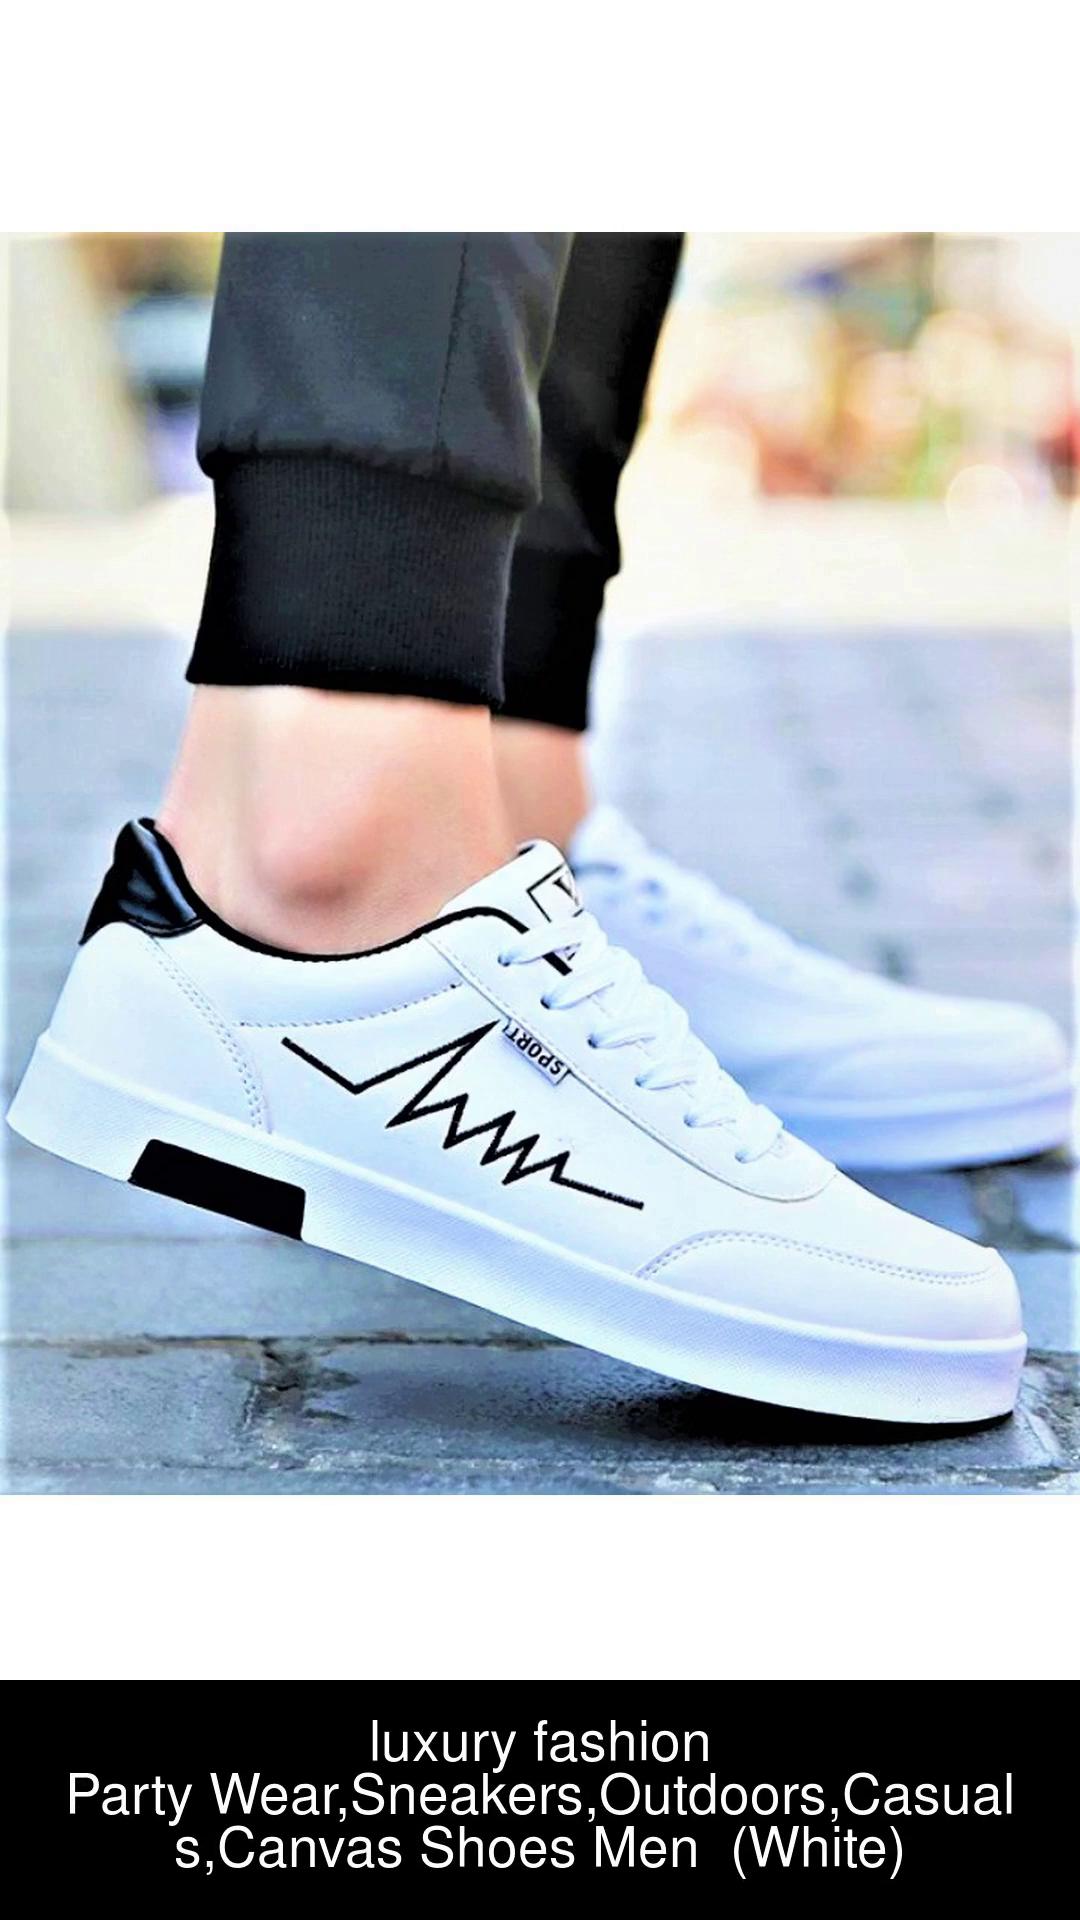 luxury fashion Luxury Fashionable casual sneaker shoes and partywear shoes  Casuals For Men